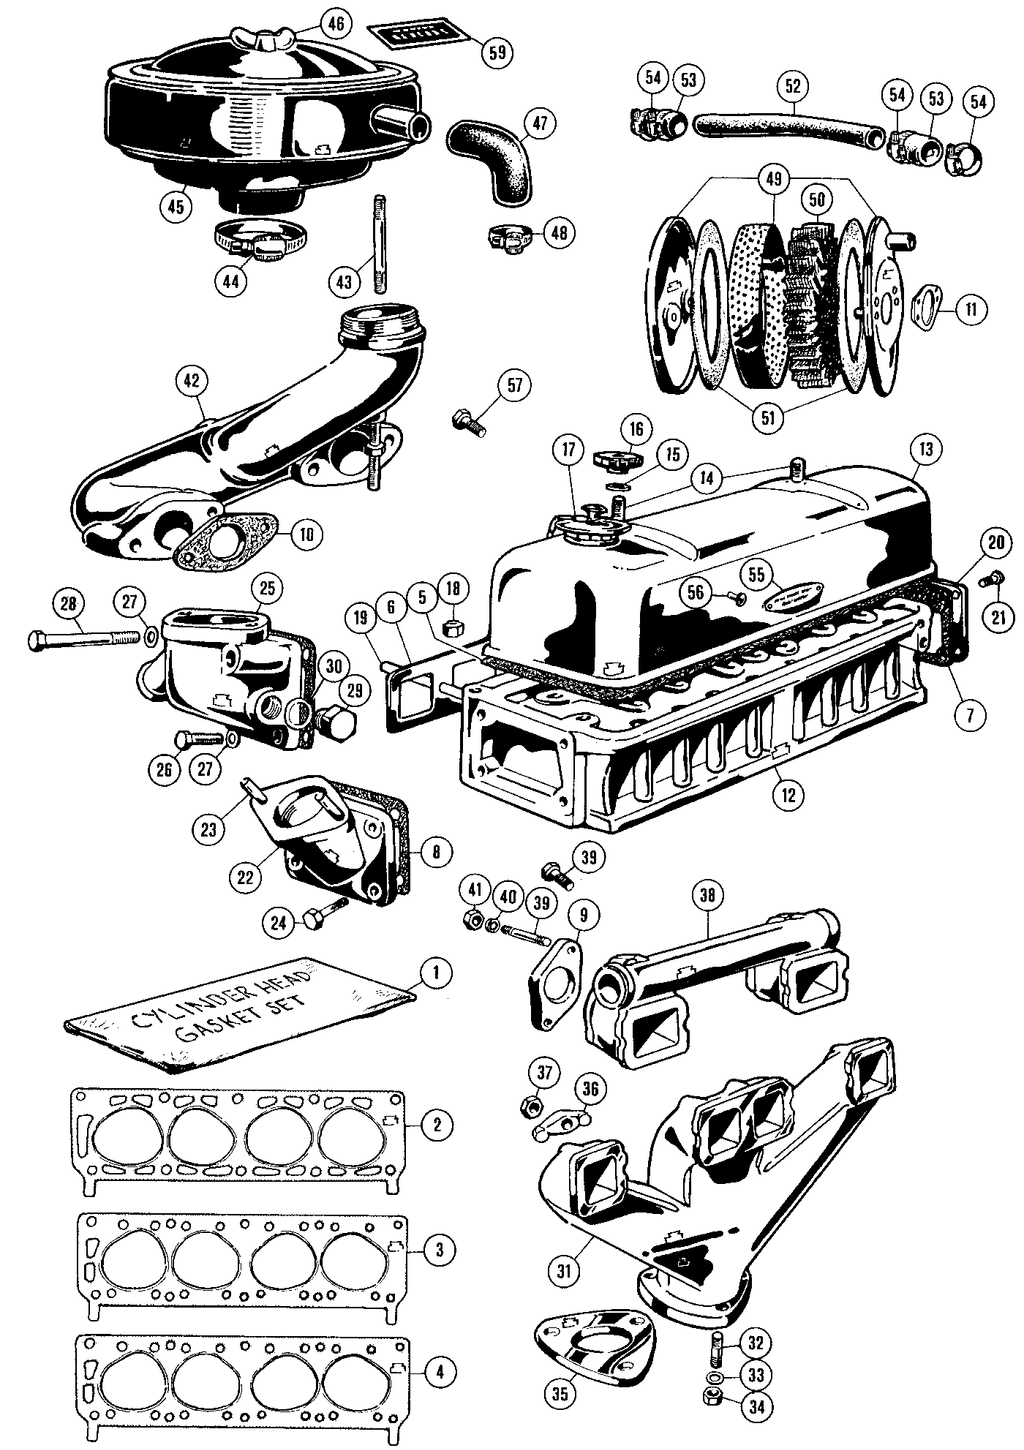 MGTD-TF 1949-1955 - Rocker covers | Webshop Anglo Parts - 1